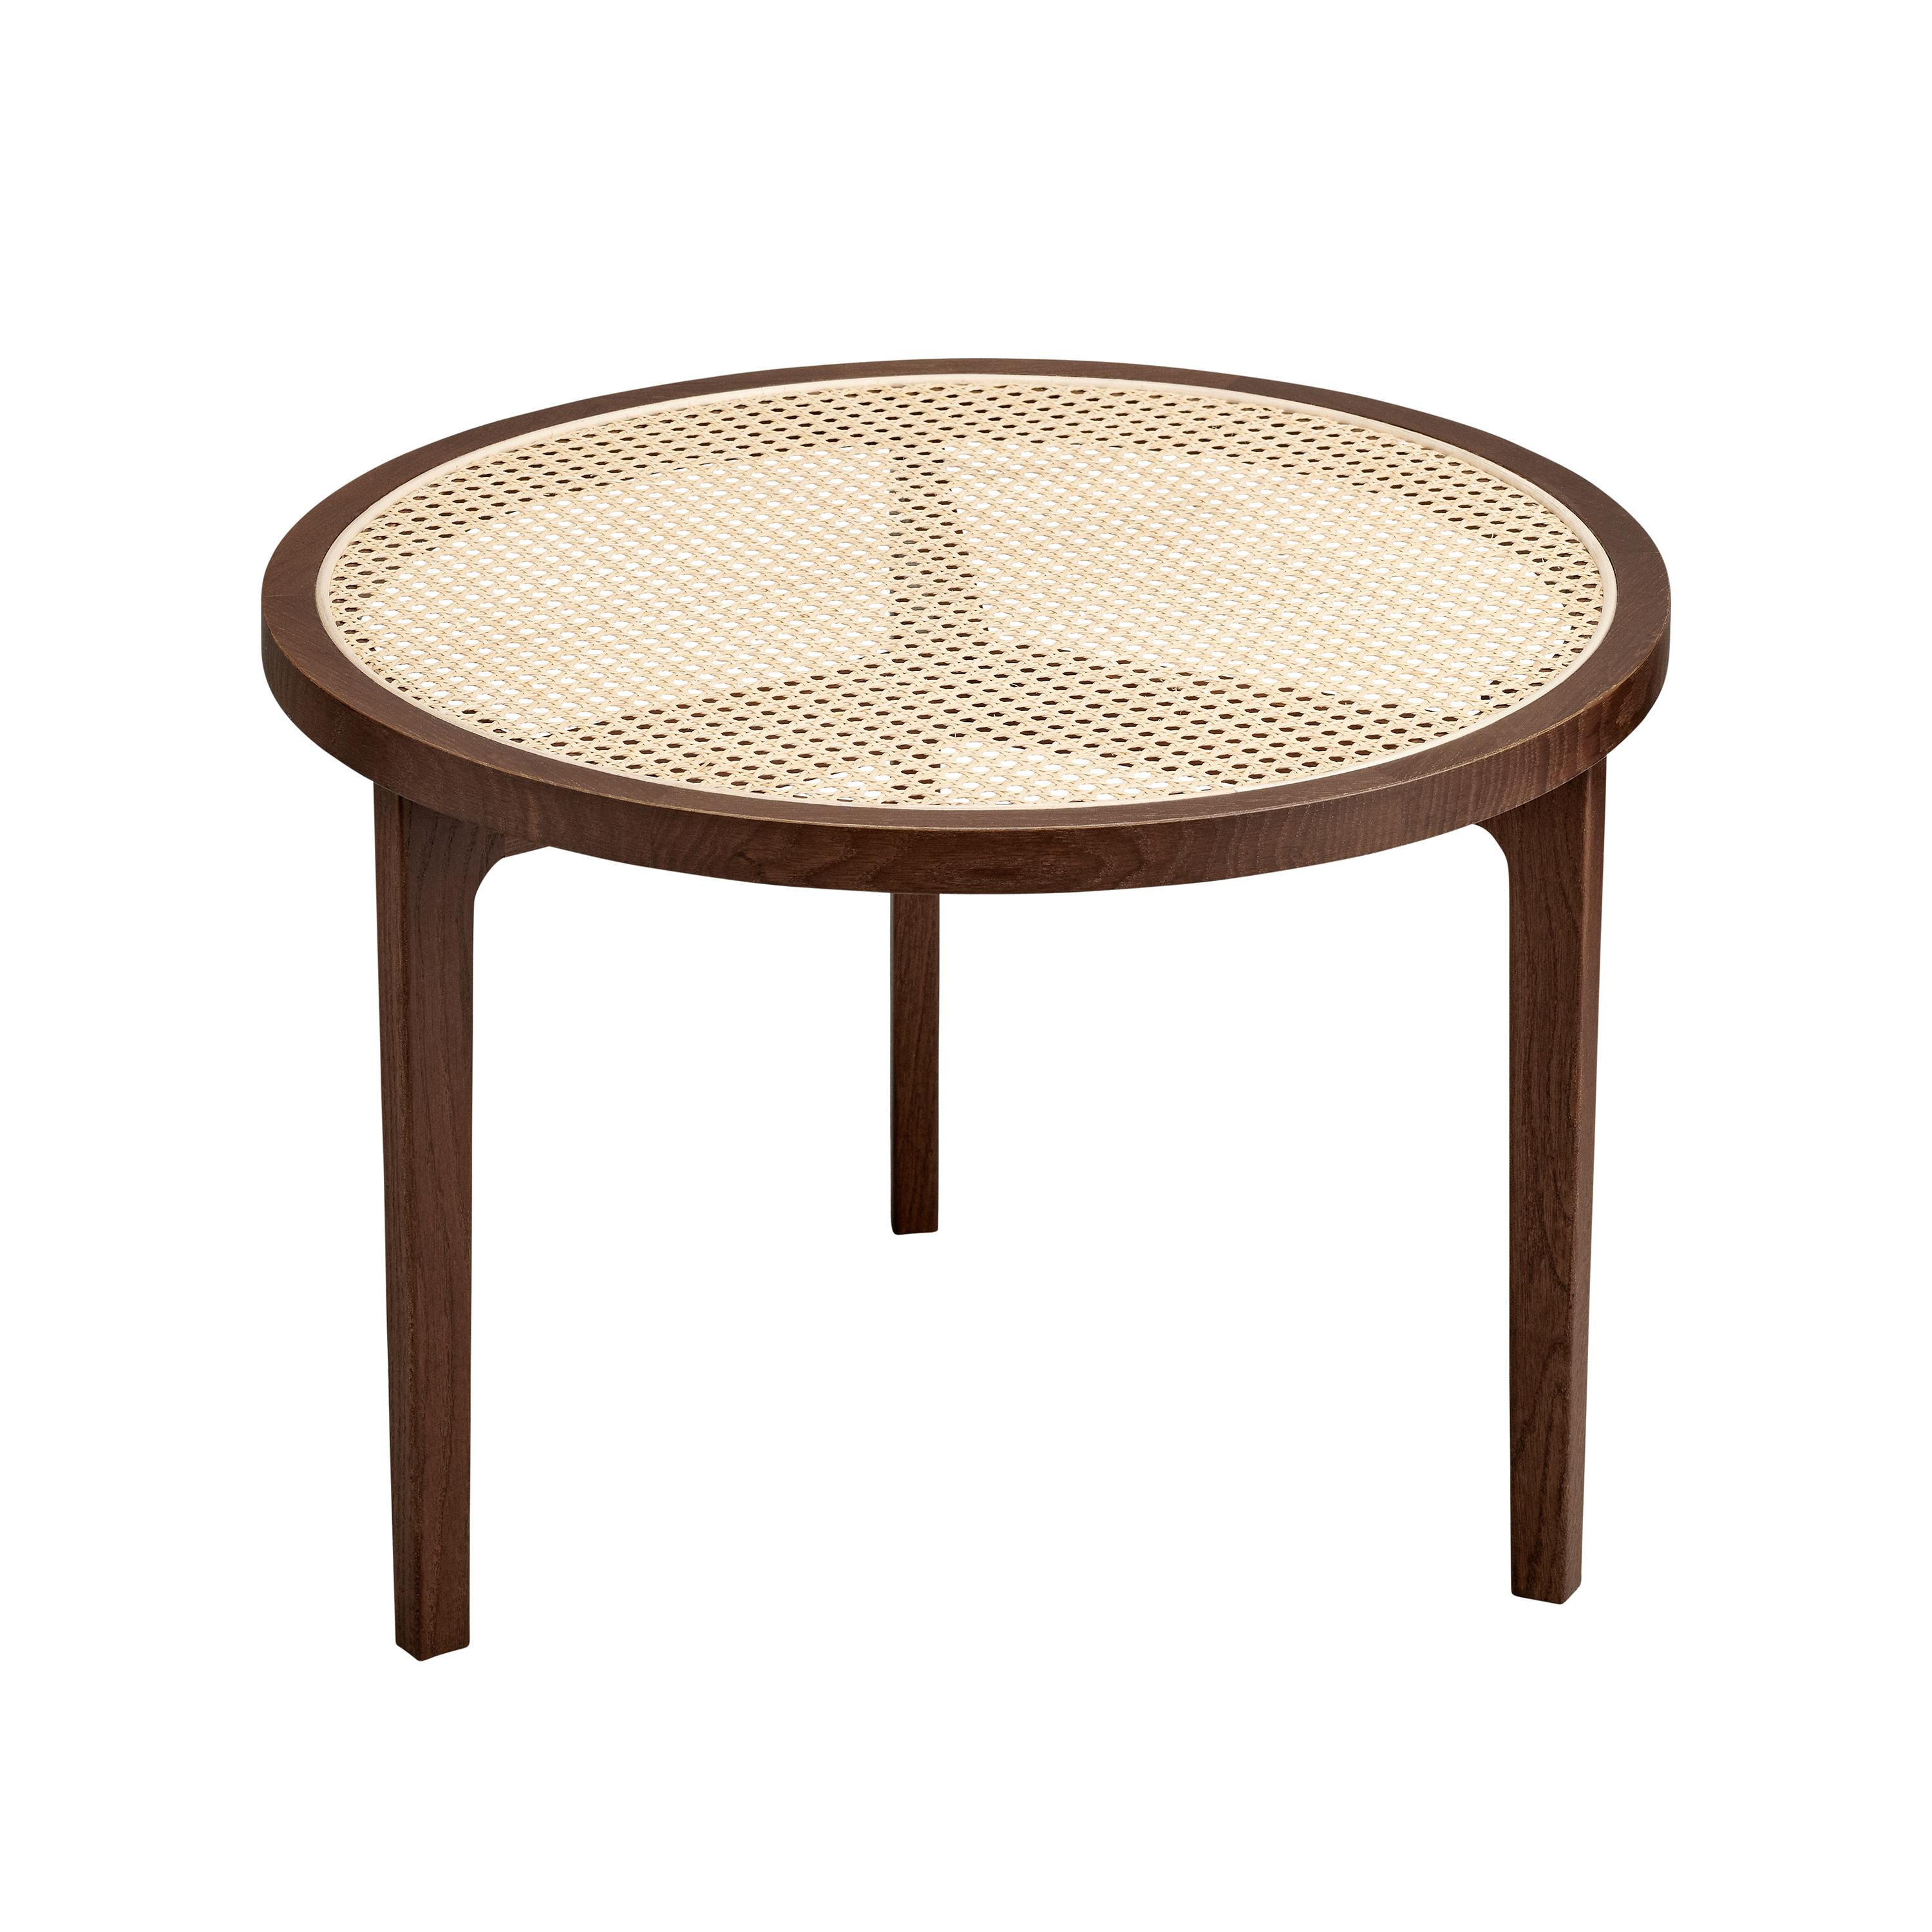 'Le Roi' Coffee Table by Norr11

Dimensions :
Diameter: 60 cm
Height: 42 cm

Model shown on the picture:
Color: Dark Smoked Oak
Natural French Rattan

The Le Roi Coffee Table is constructed as a frame geometry of solid oak, with
inlaid natural